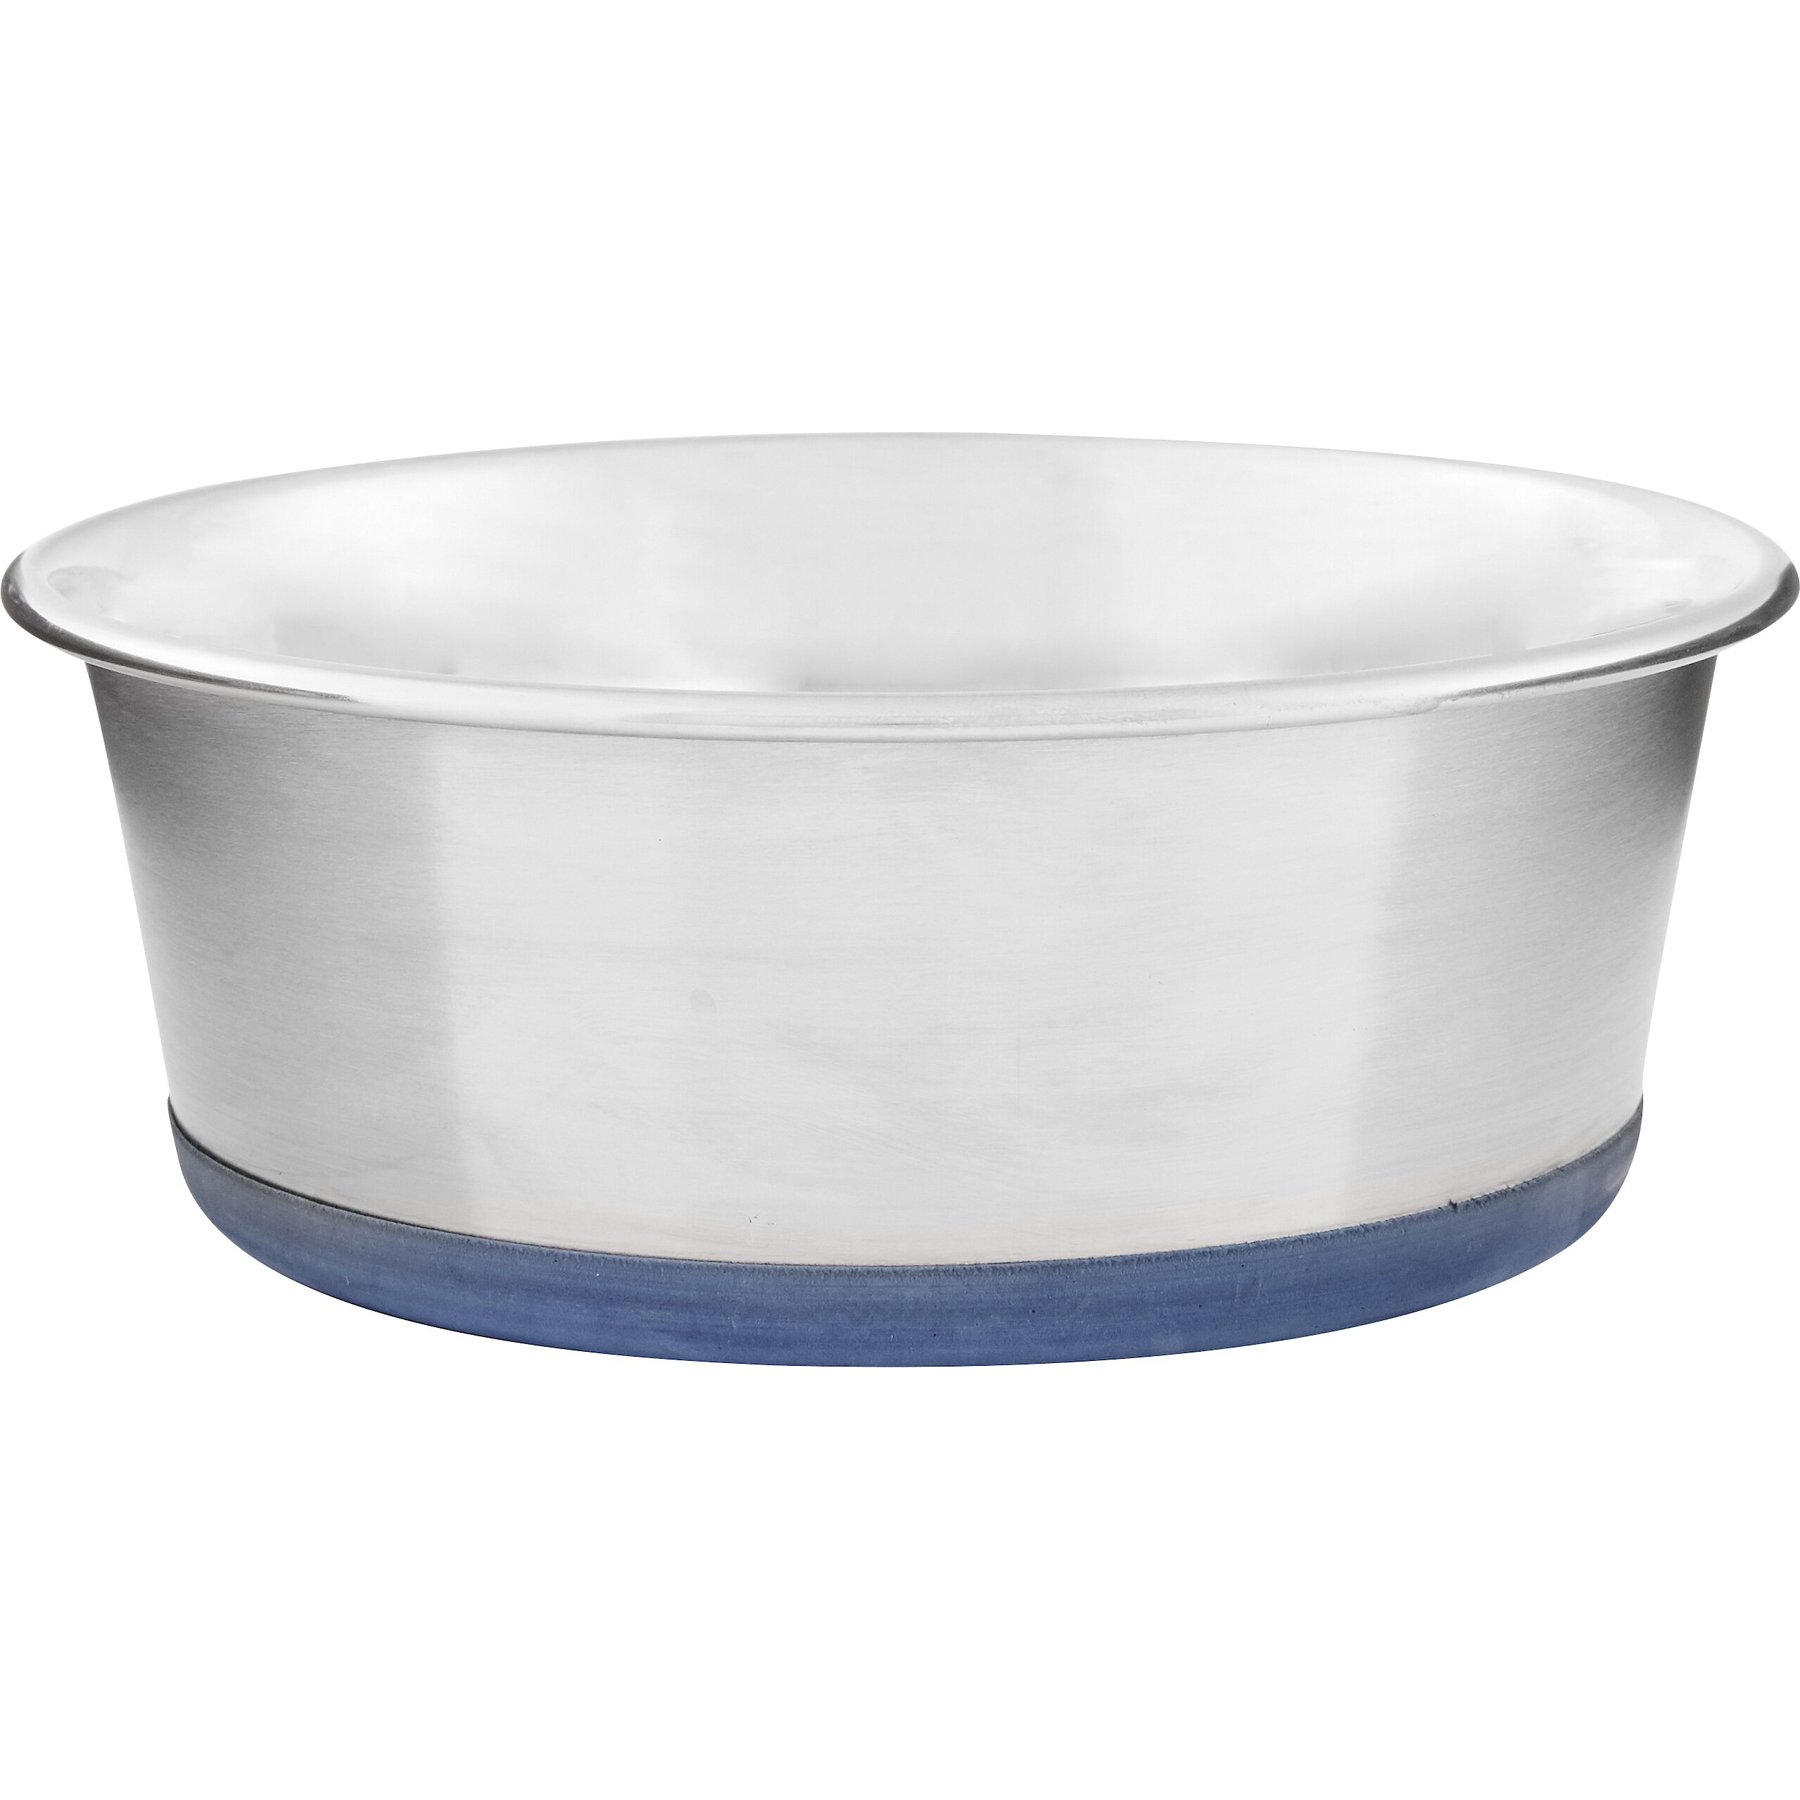 Indipets Heavy Duty Stainless Steel Dog Pail 